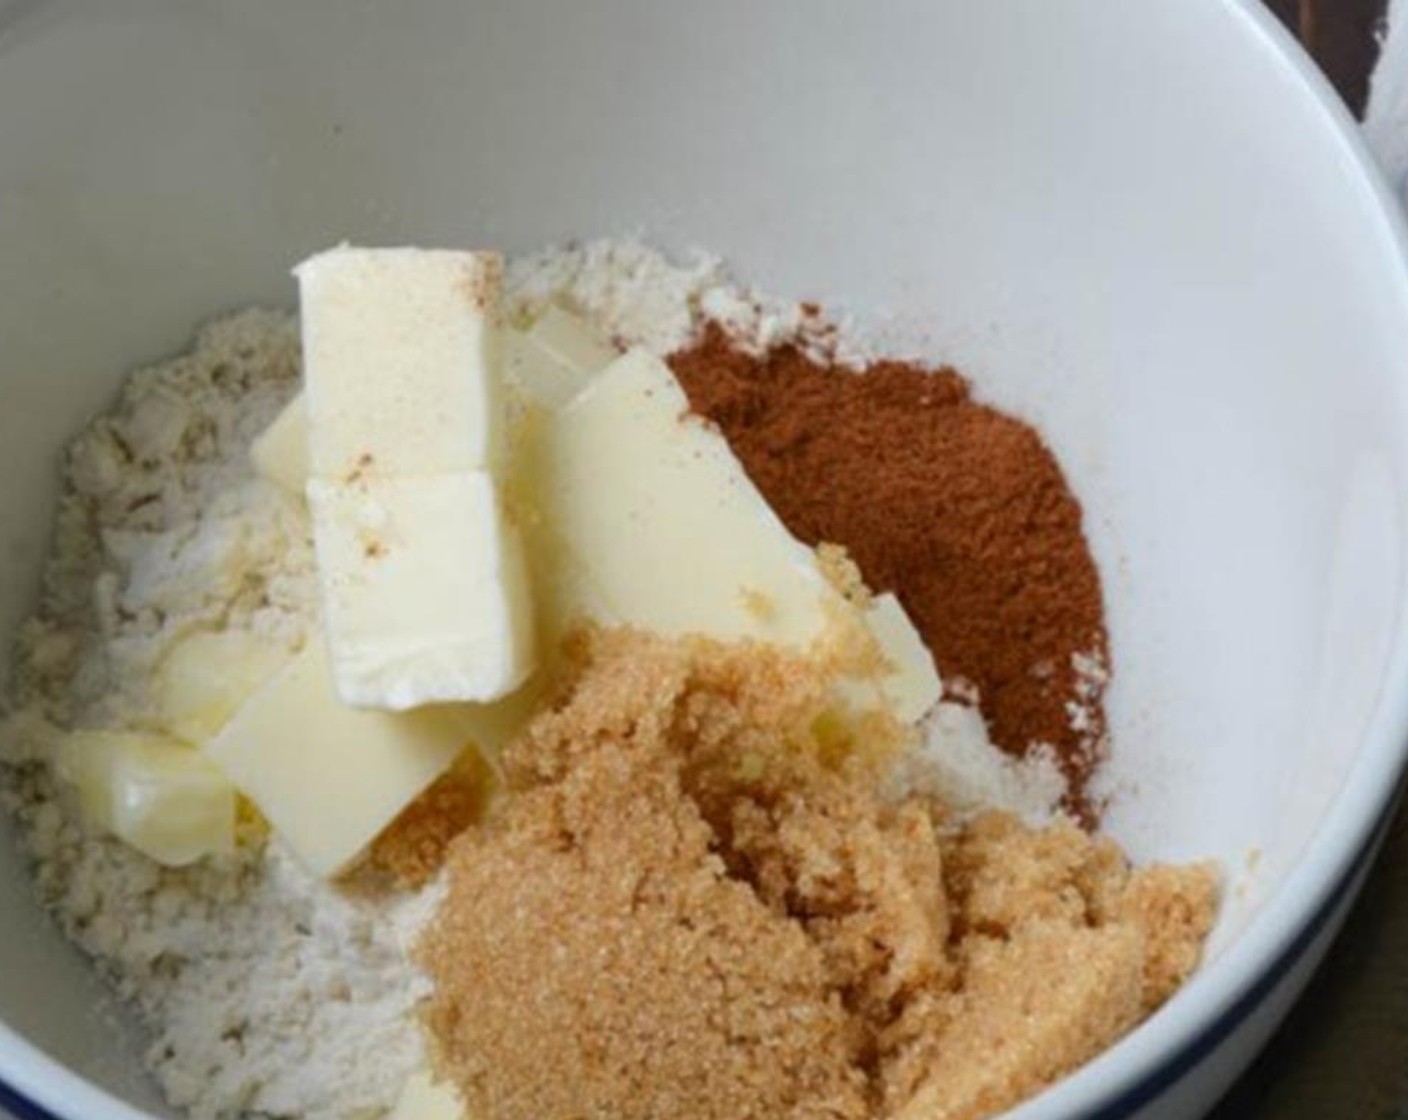 step 2 To make the streusel, in a small bowl combine the Unsalted Butter (2 1/2 Tbsp), All-Purpose Flour (1/4 cup), Brown Sugar (2 Tbsp) and Ground Cinnamon (1/2 tsp)